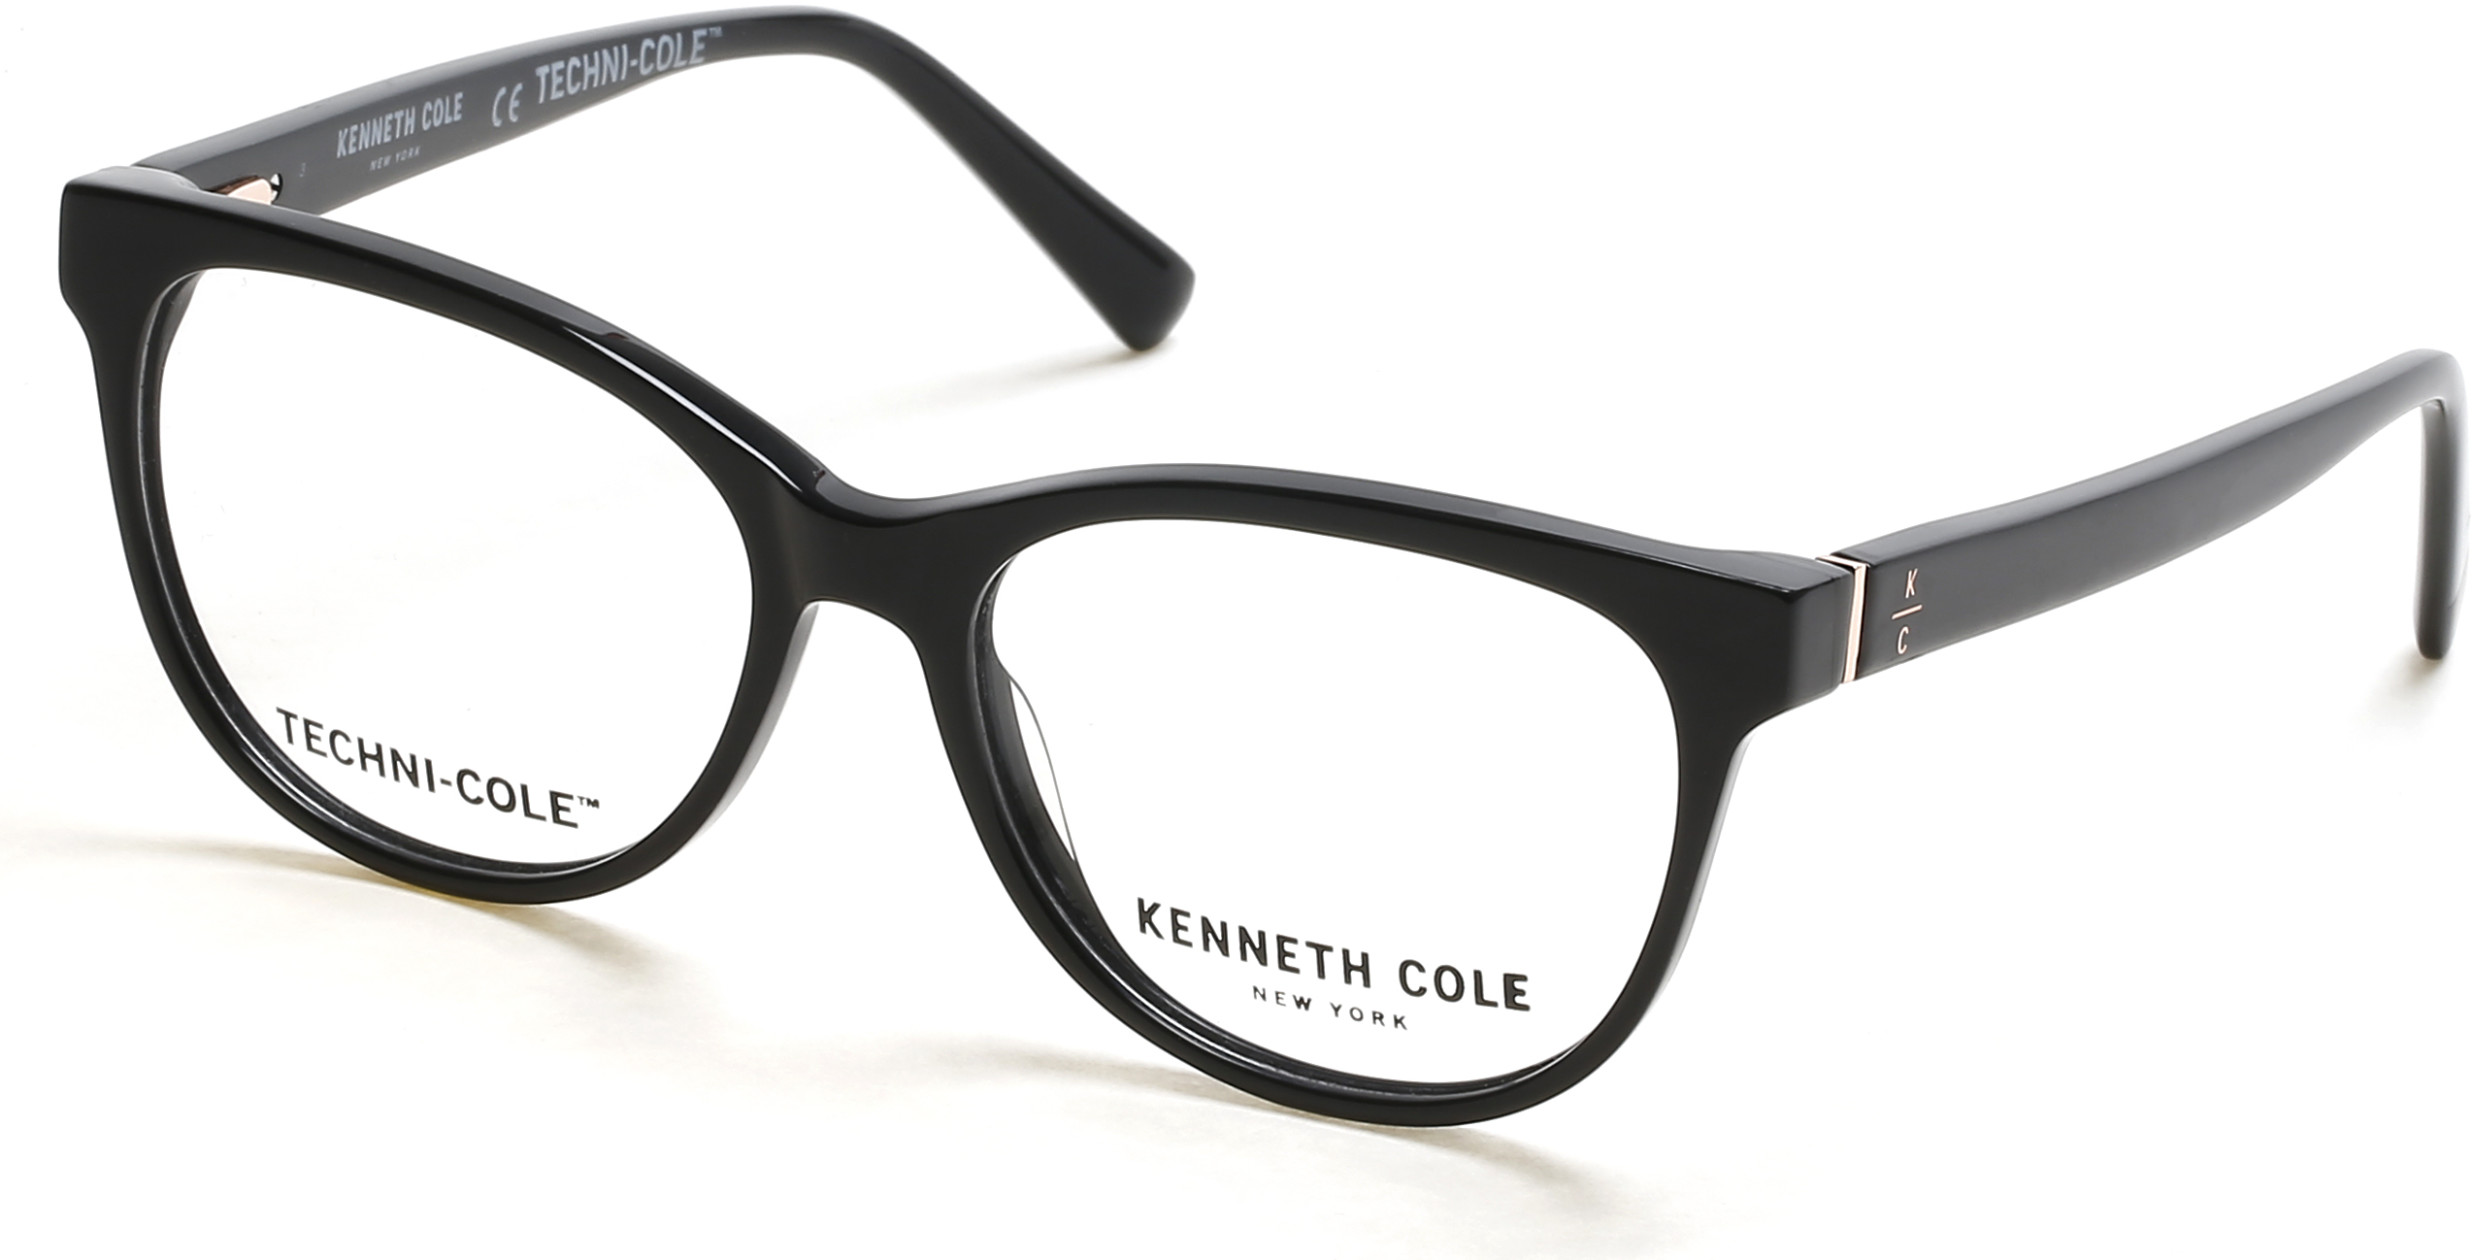 KENNETH COLE NY 0334 001